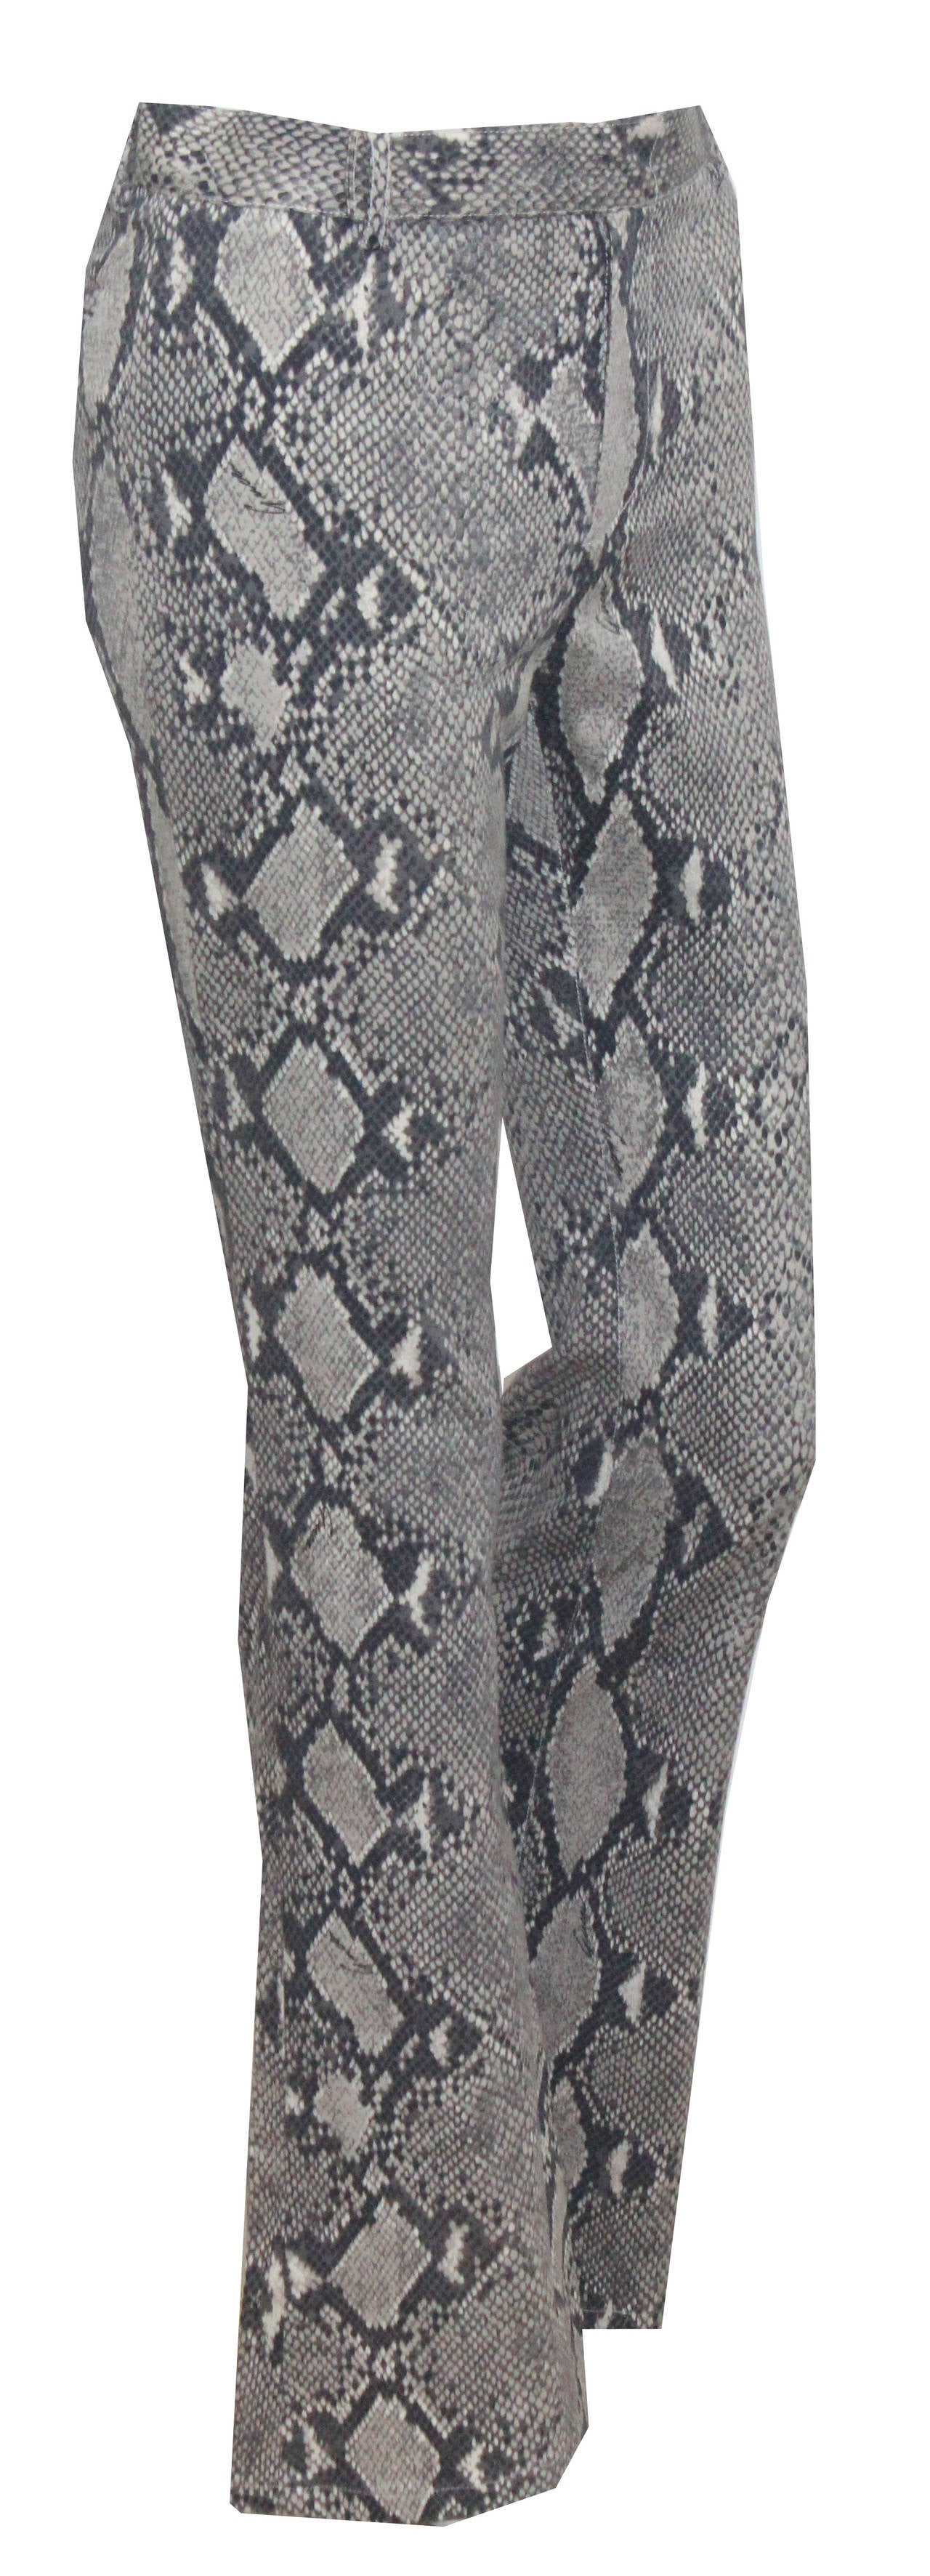 A pair of grey snakeskin print bell bottom plants by Gucci designed by Tom Ford for the Spring/Summer 2000 runway collection.

Sizing: Italian 38 / French 34 / UK 6 / US 4 / XS-S